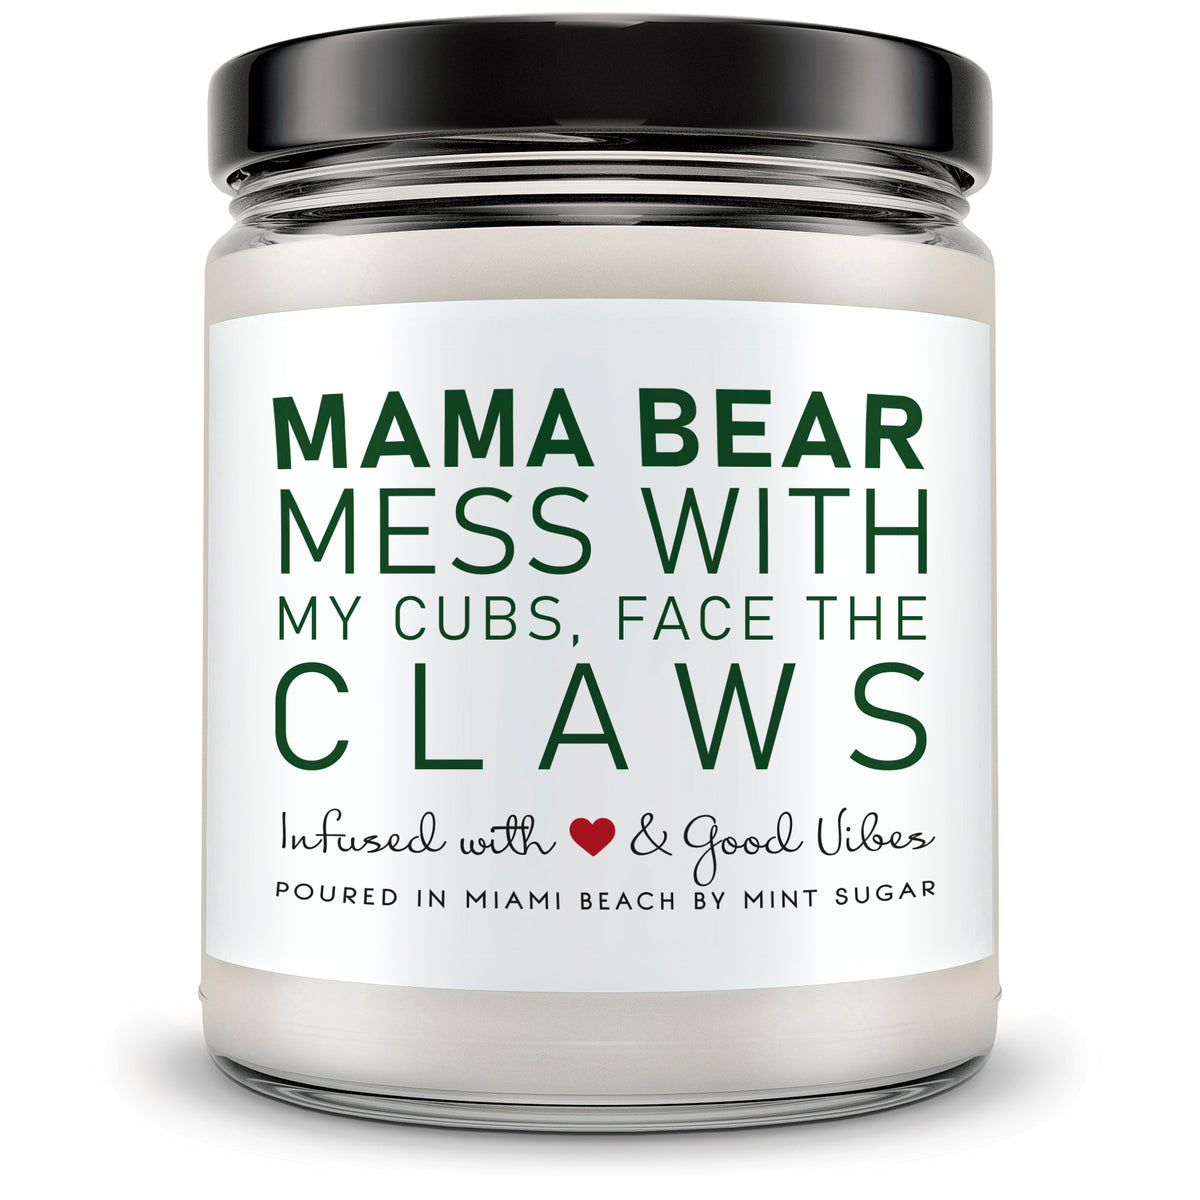 Mama Bear, Mess With My Cubs, Face The Claws - Mint Sugar Candle